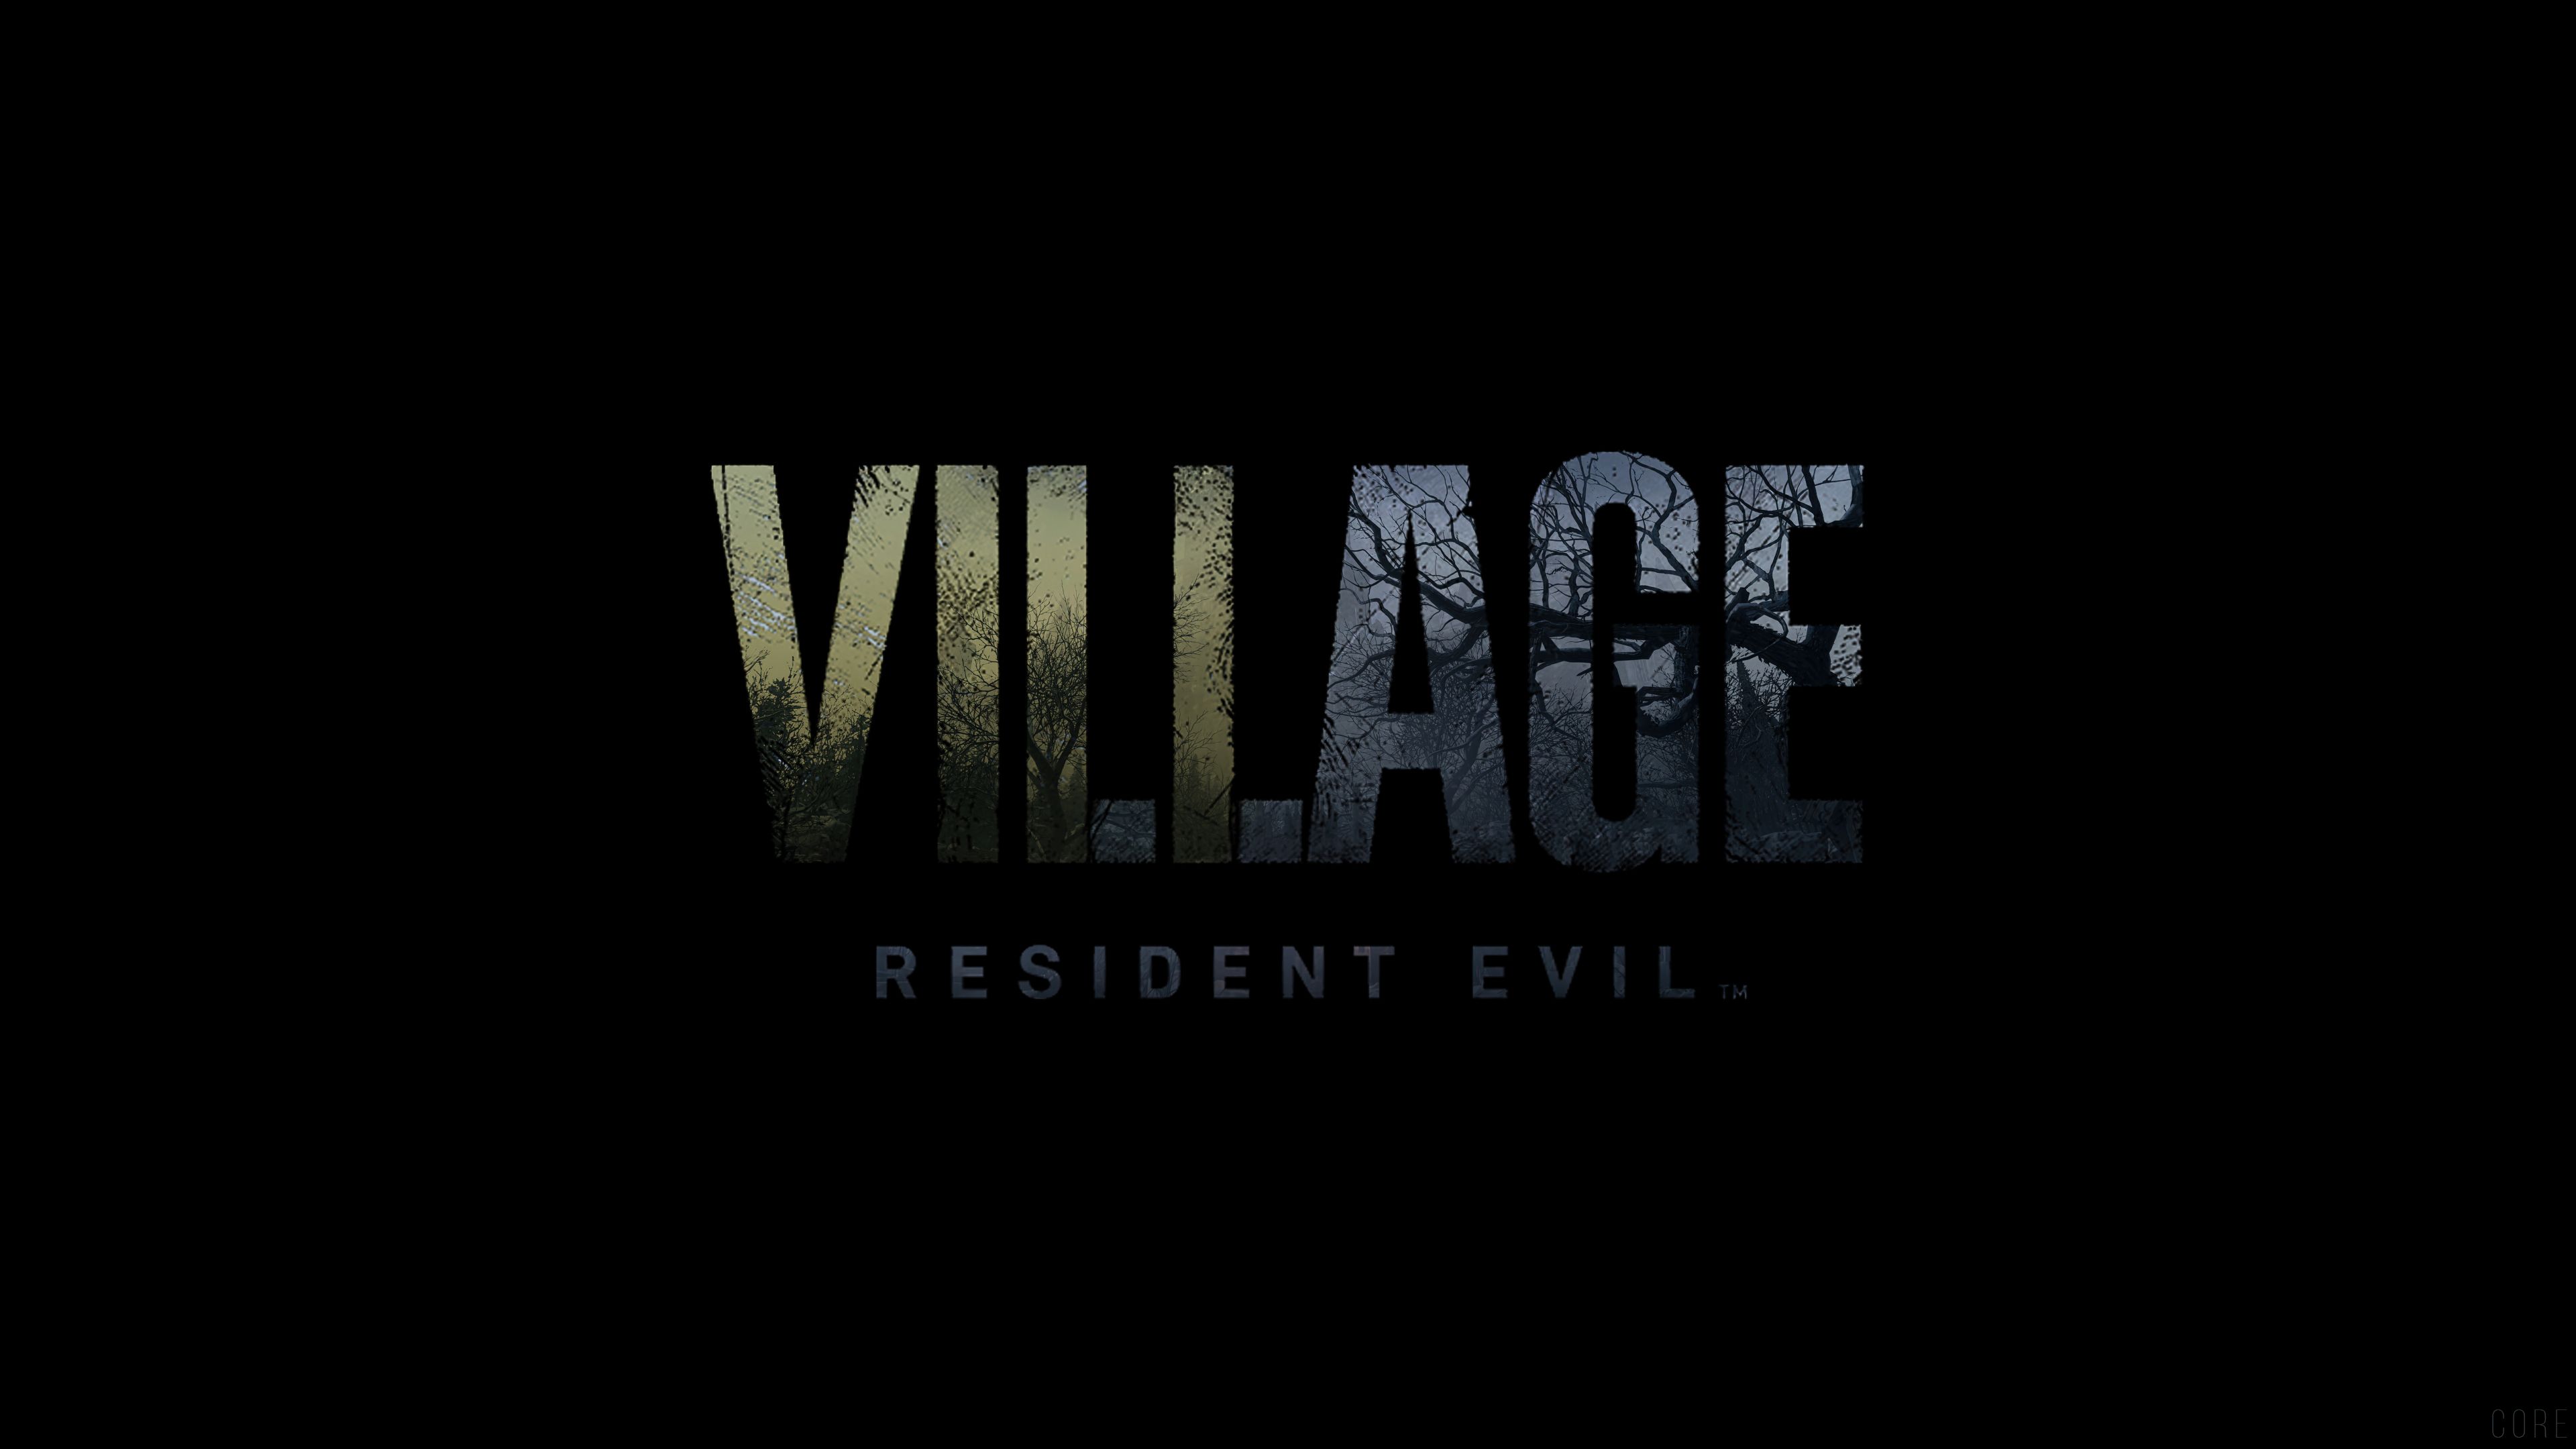 Village Resident Evil Hd Wallpapers Wallpaper Cave 7395